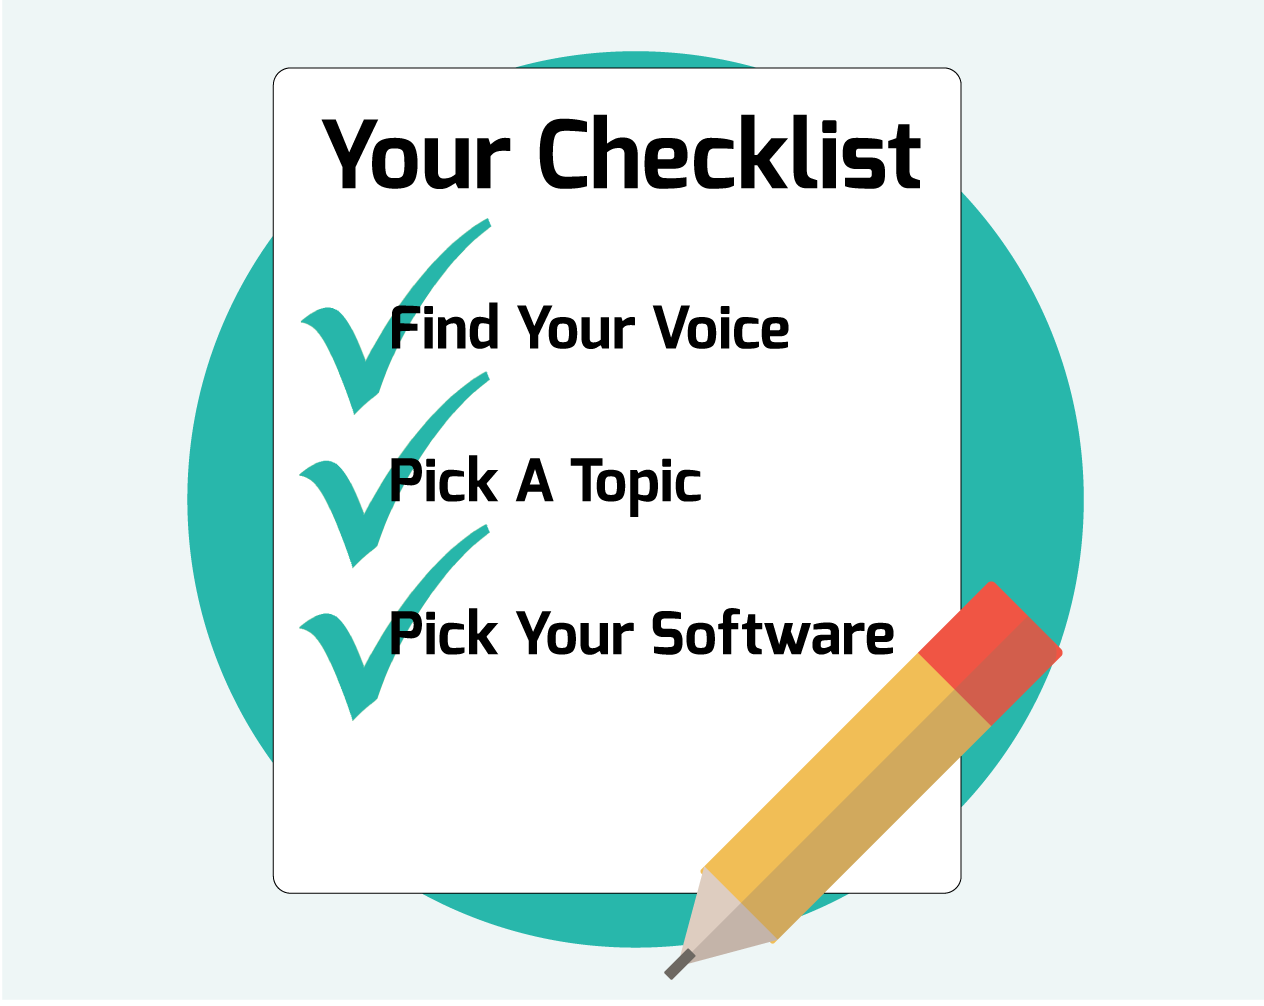 Make a checklist for your event